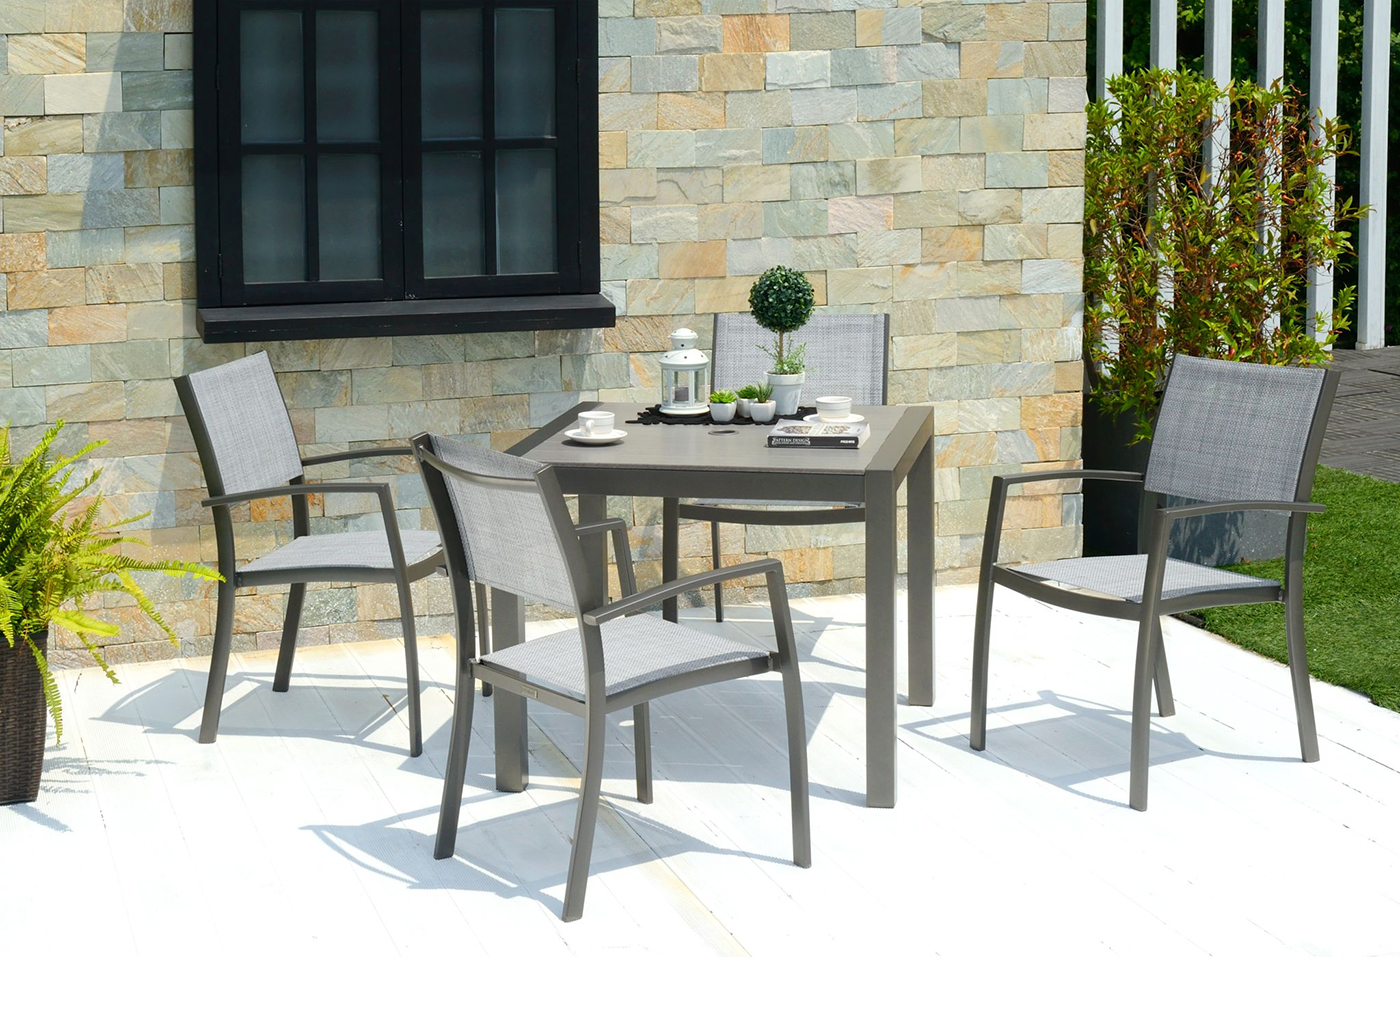 LifestyleGarden Solana 4 Seat Square Dining Set including Parasol and Base